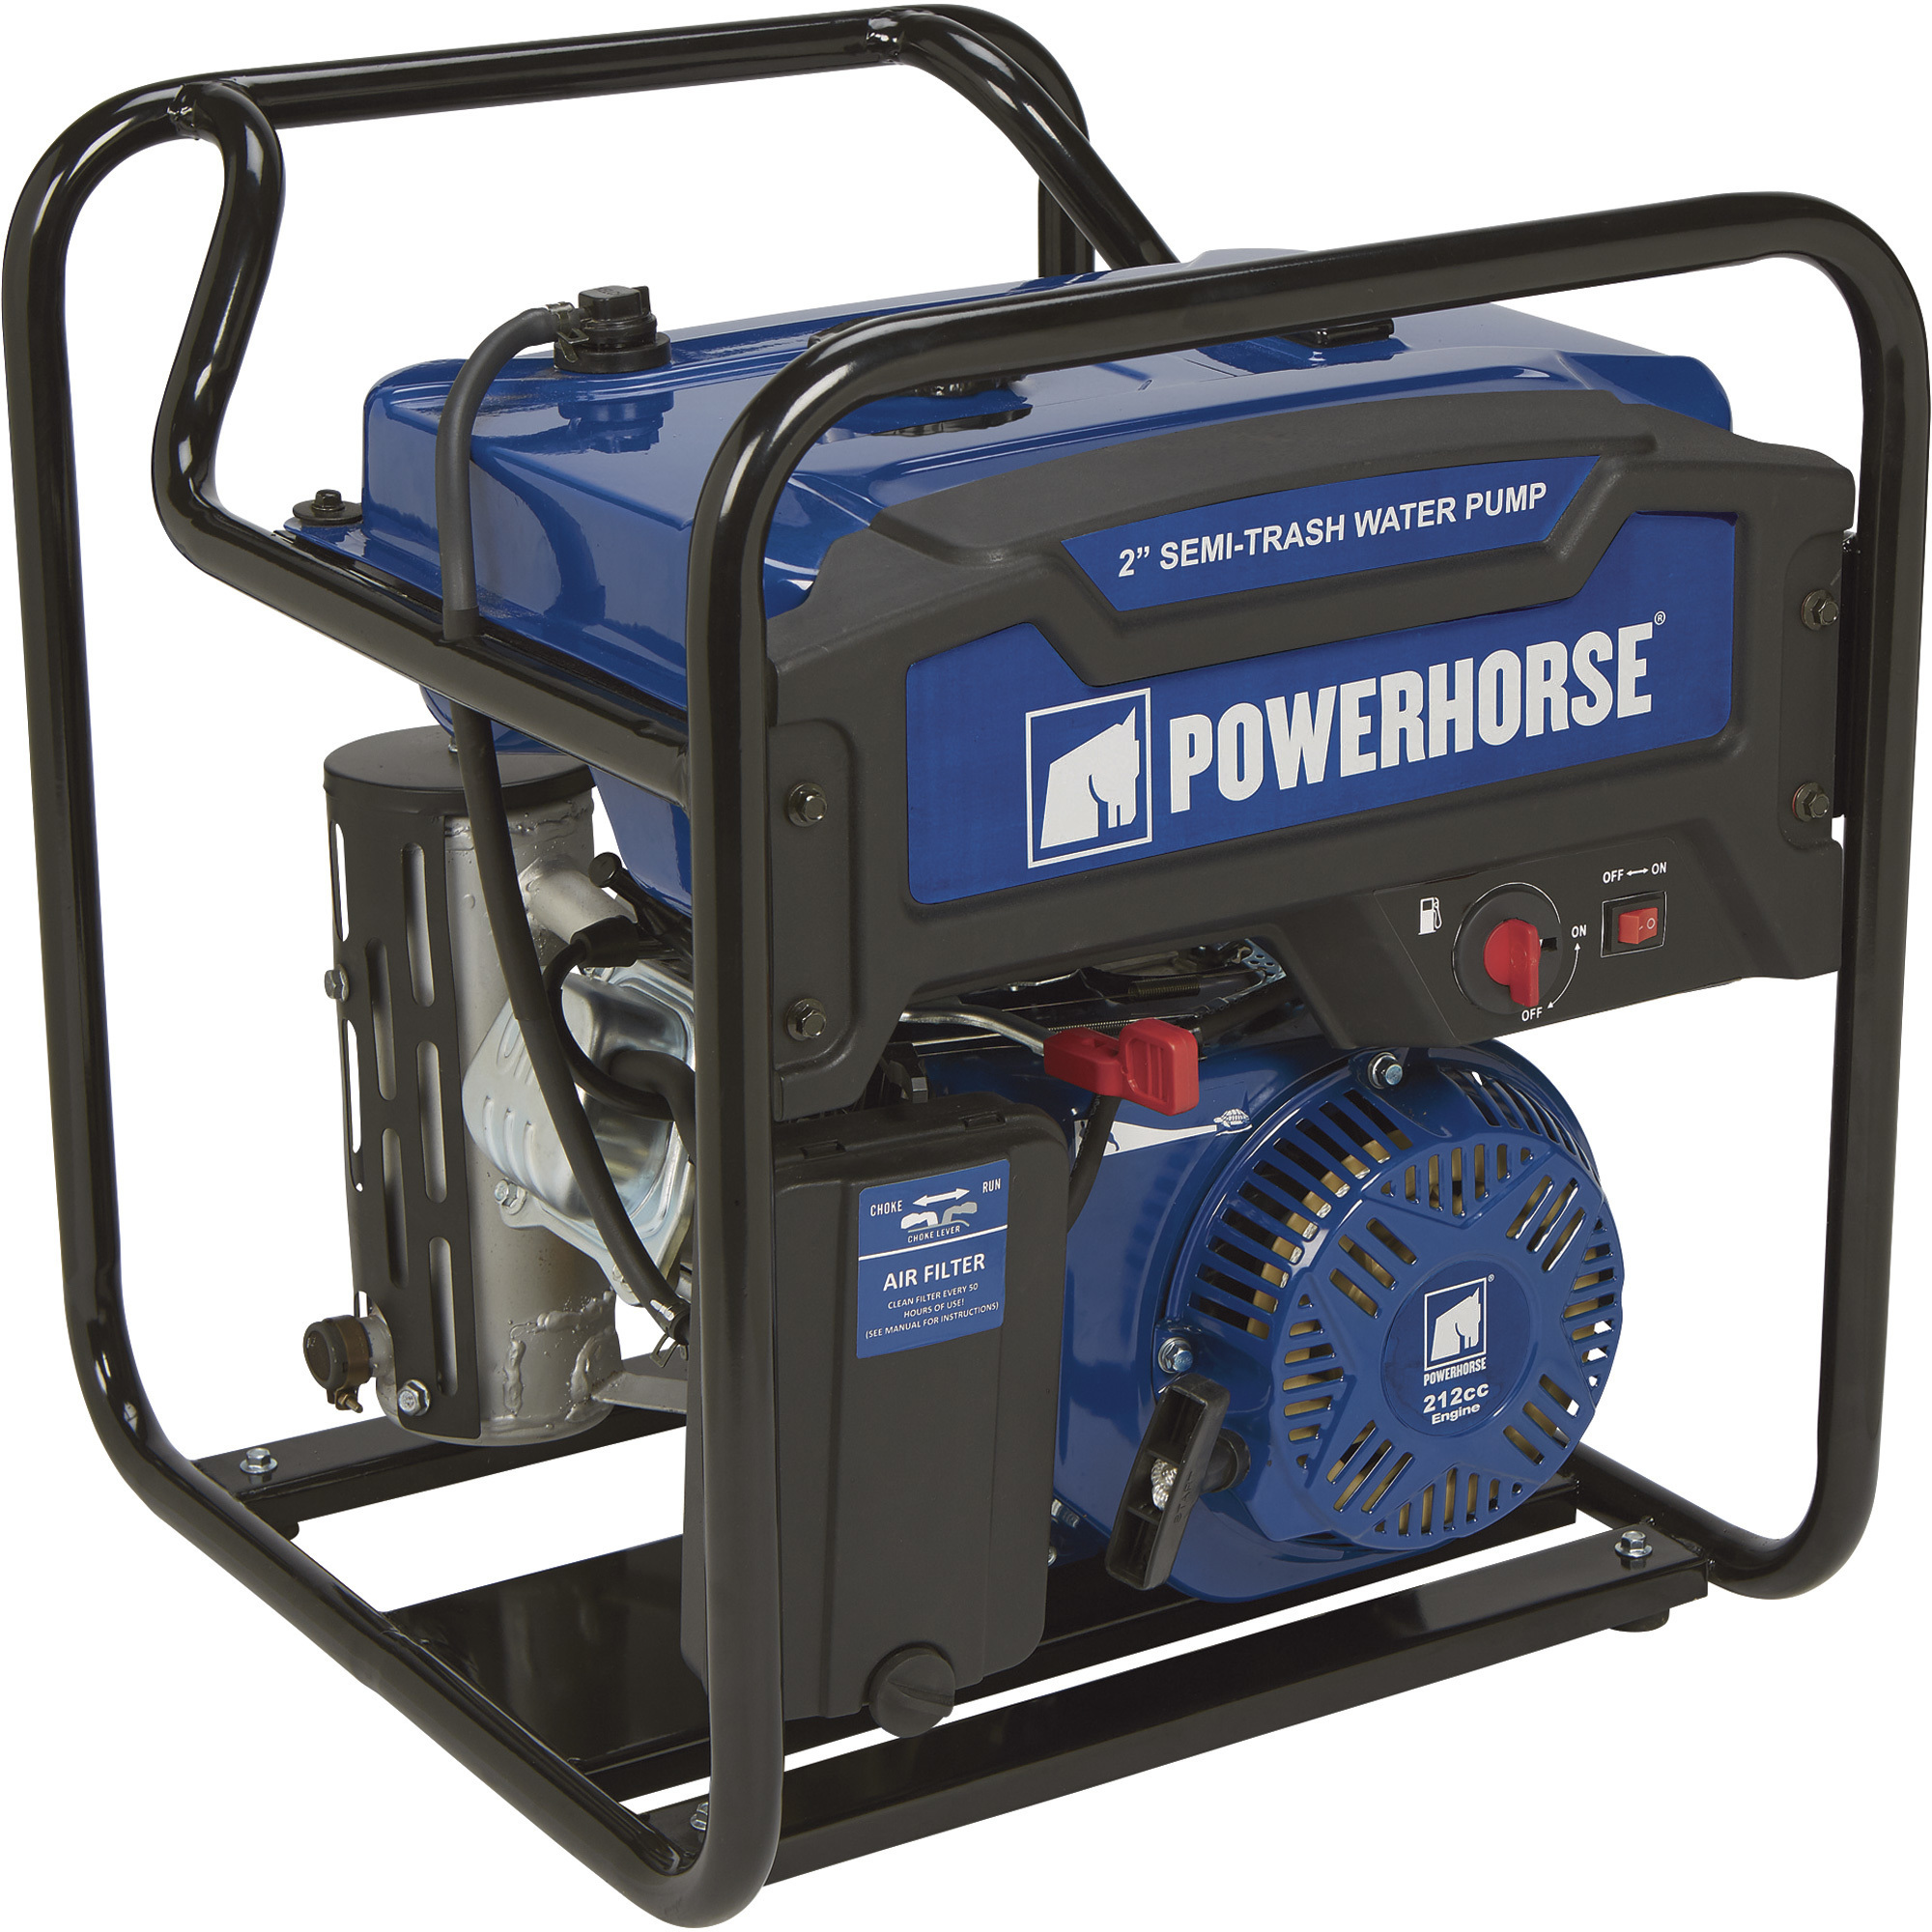 Powerhorse Extended Run Semi-Trash Water Pump, 2Inch Ports, 7860 GPH, 212cc OHV Engine, 5/8Inch Solids Capacity, Model DS20